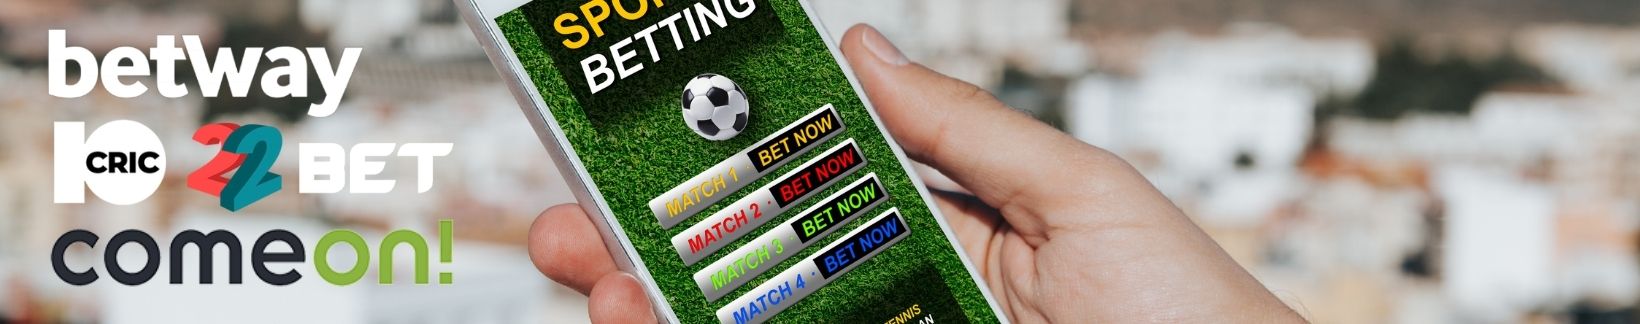 Apps for sports betting detailed discussion